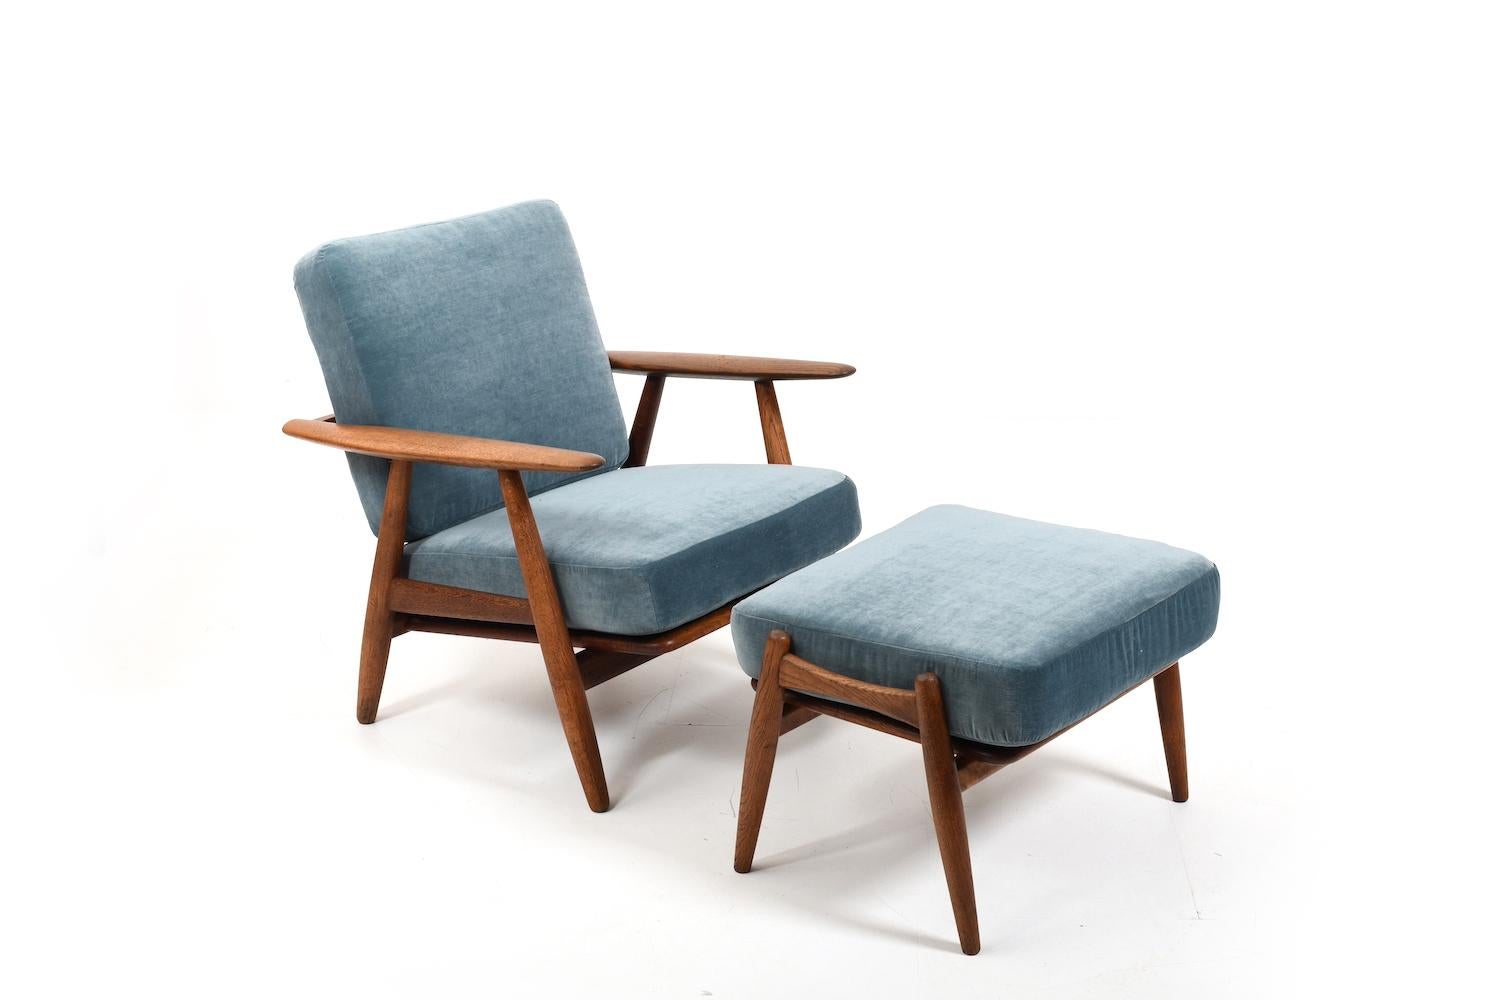 Early GE-240 (cigar chair & foot stool) by Hans J. Wegner for Getama, Denmark 1950s. Made in solid oak. Original cushions with new upholstery. In consideration of their age, the old feathers in the cushions were restored and reupholstered with a